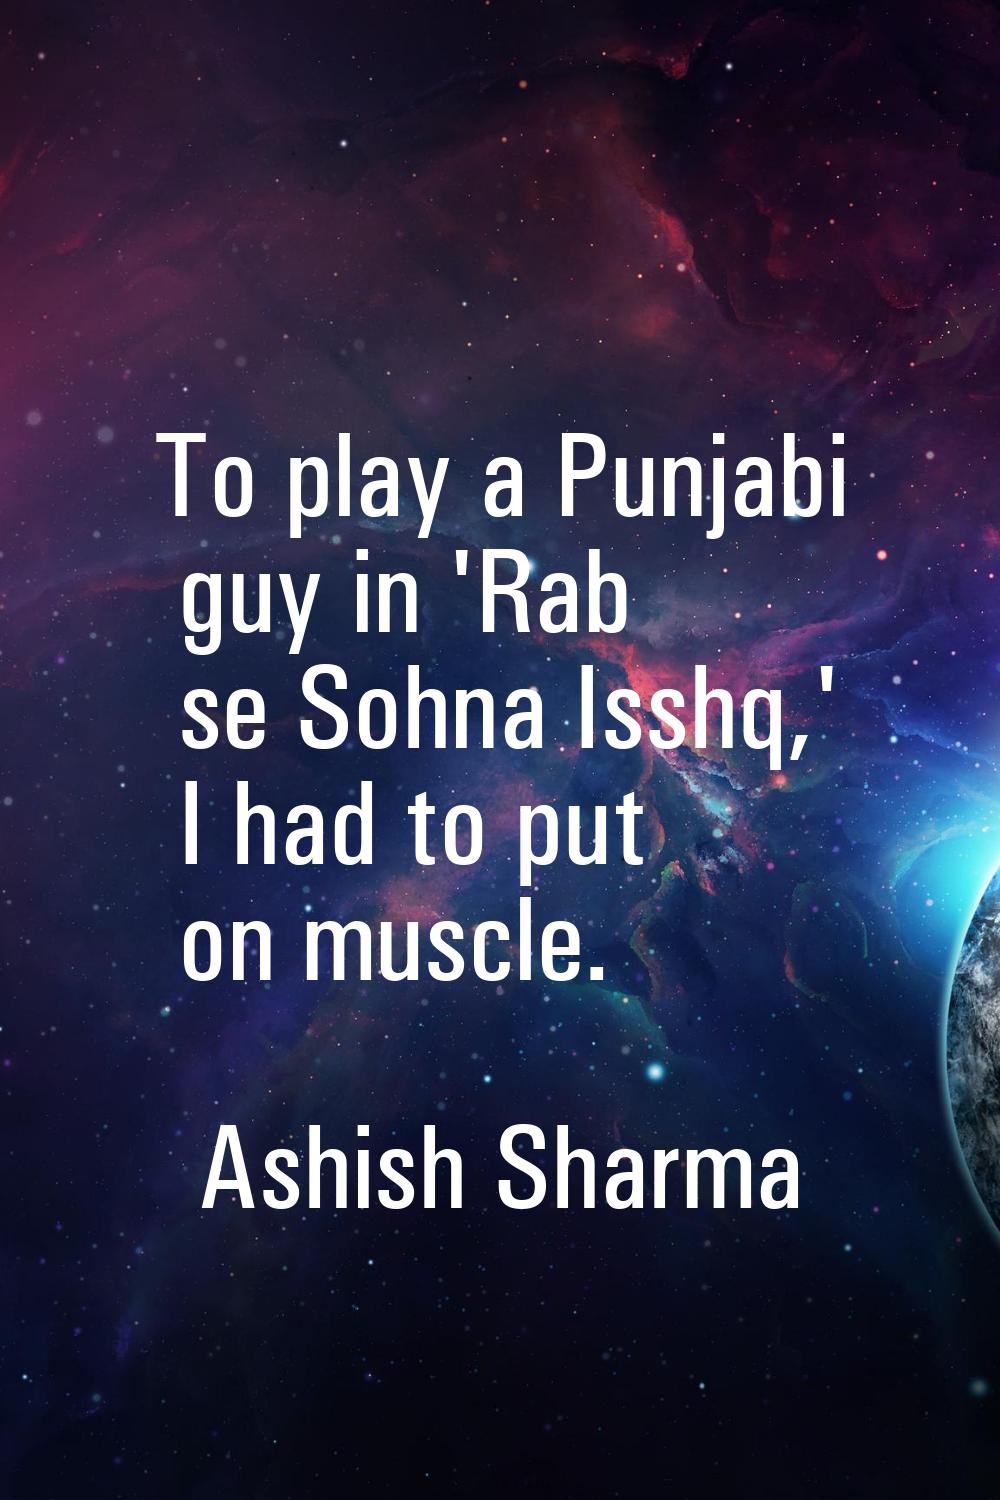 To play a Punjabi guy in 'Rab se Sohna Isshq,' I had to put on muscle.